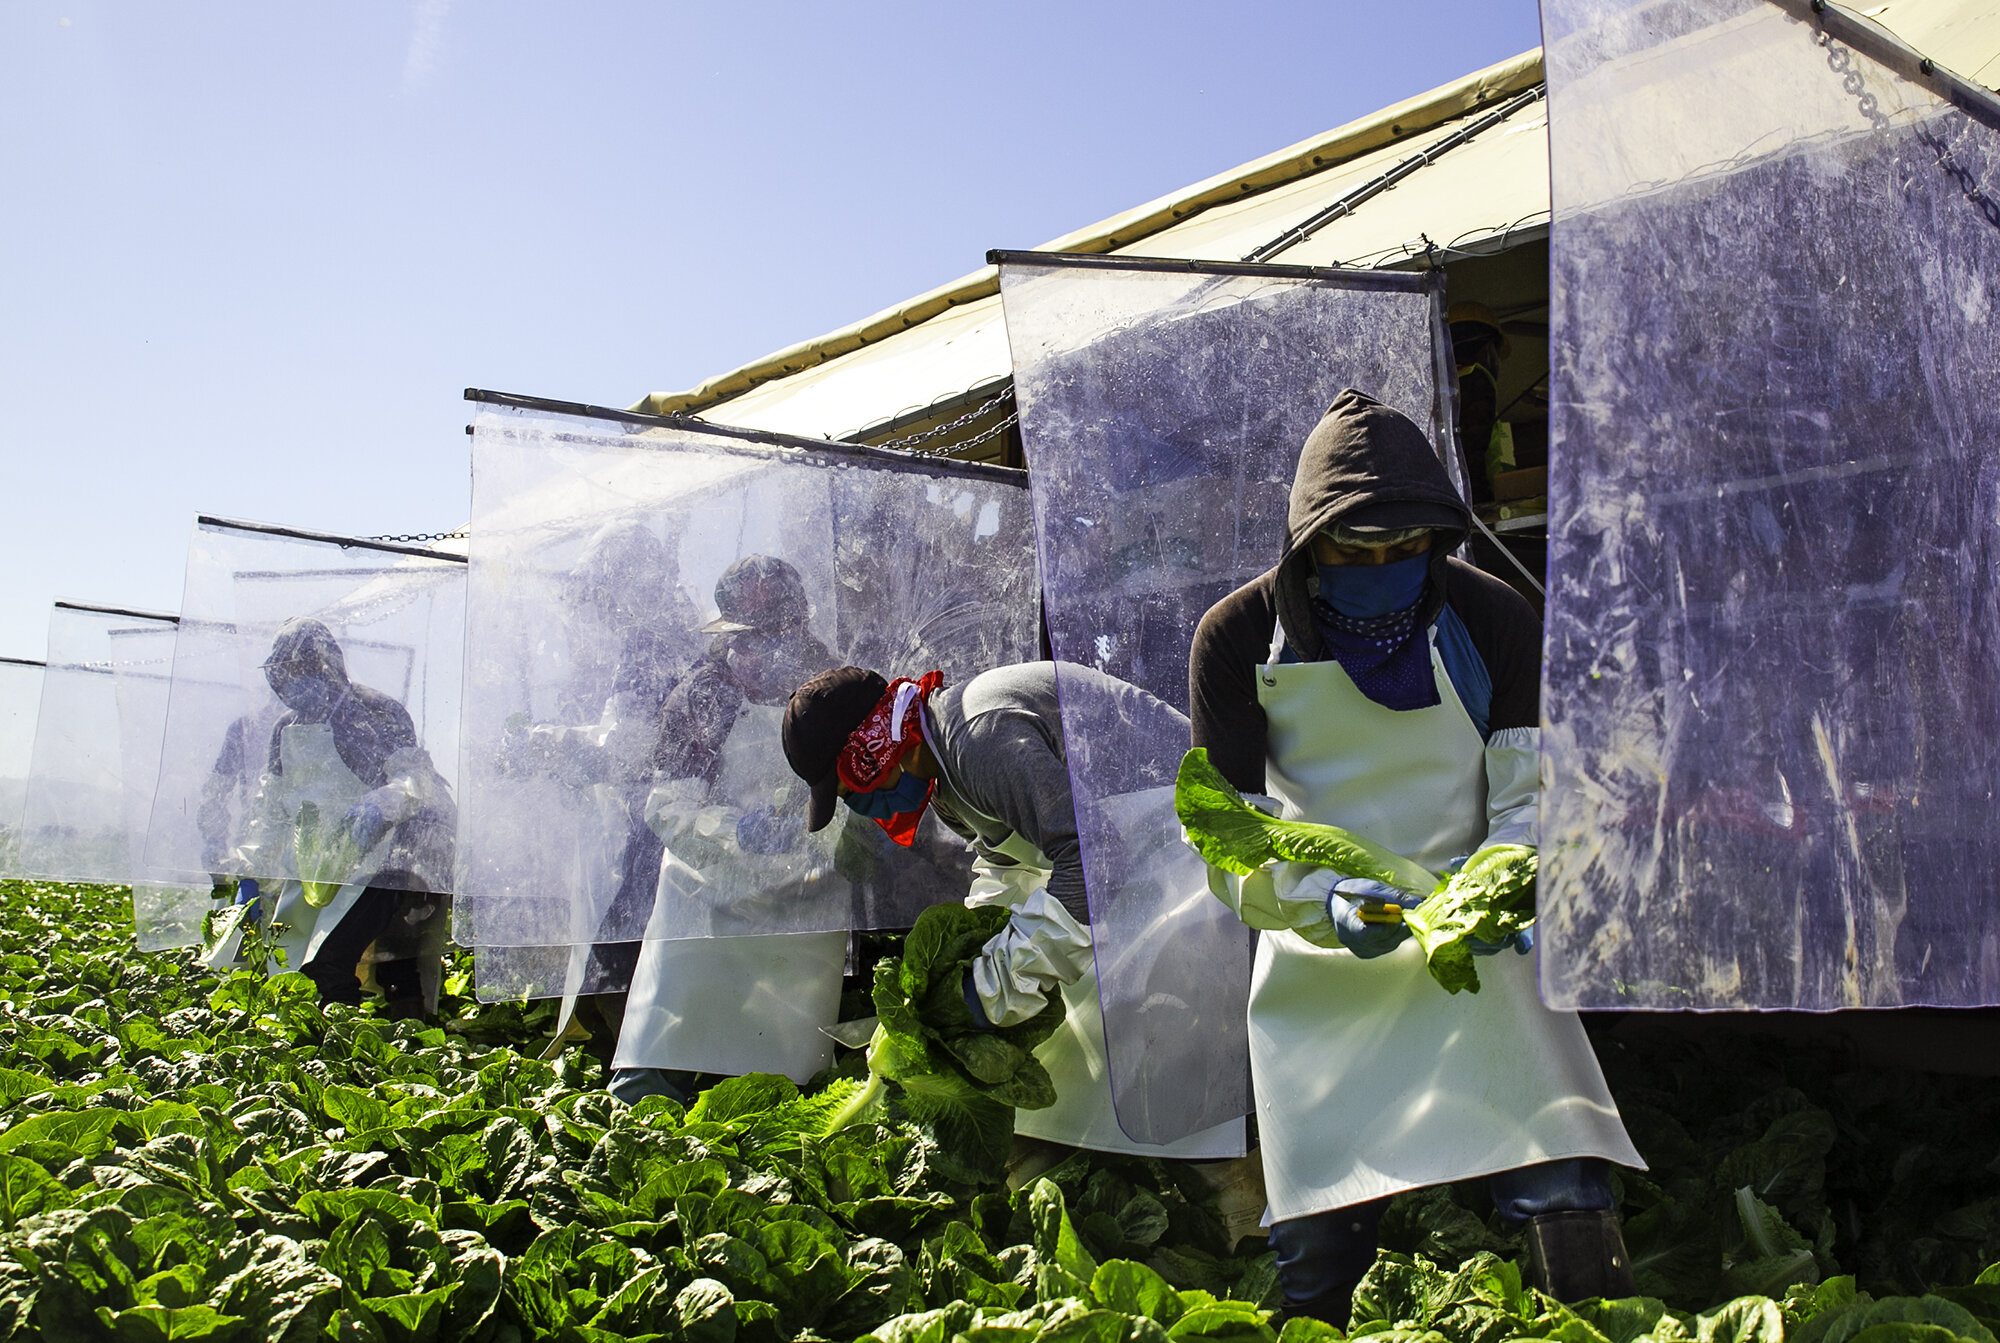  Farmworkers harvest lettuce in Salinas, Calif. on May 5, 2020, using protective measures to reduce the spread of Covid-19, including wearing masks and newly installed vinyl dividers on the lettuce harvesting machine.  